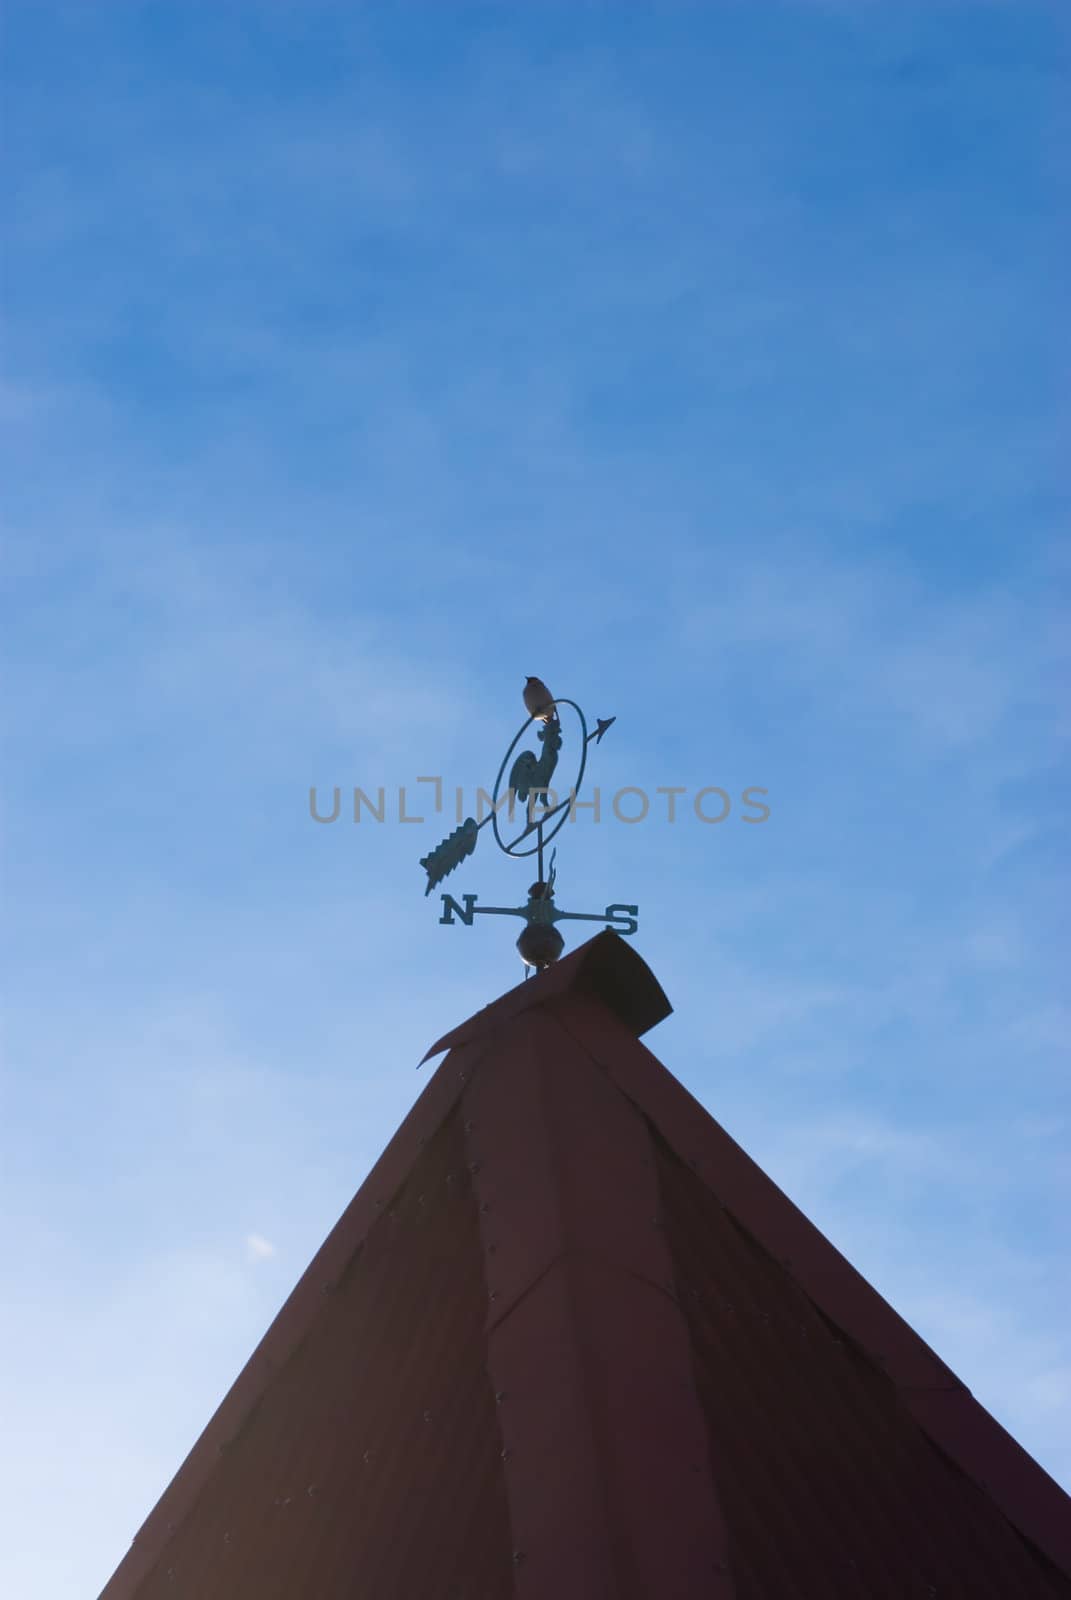 Vane on the roof of a country house on a background of blue sky